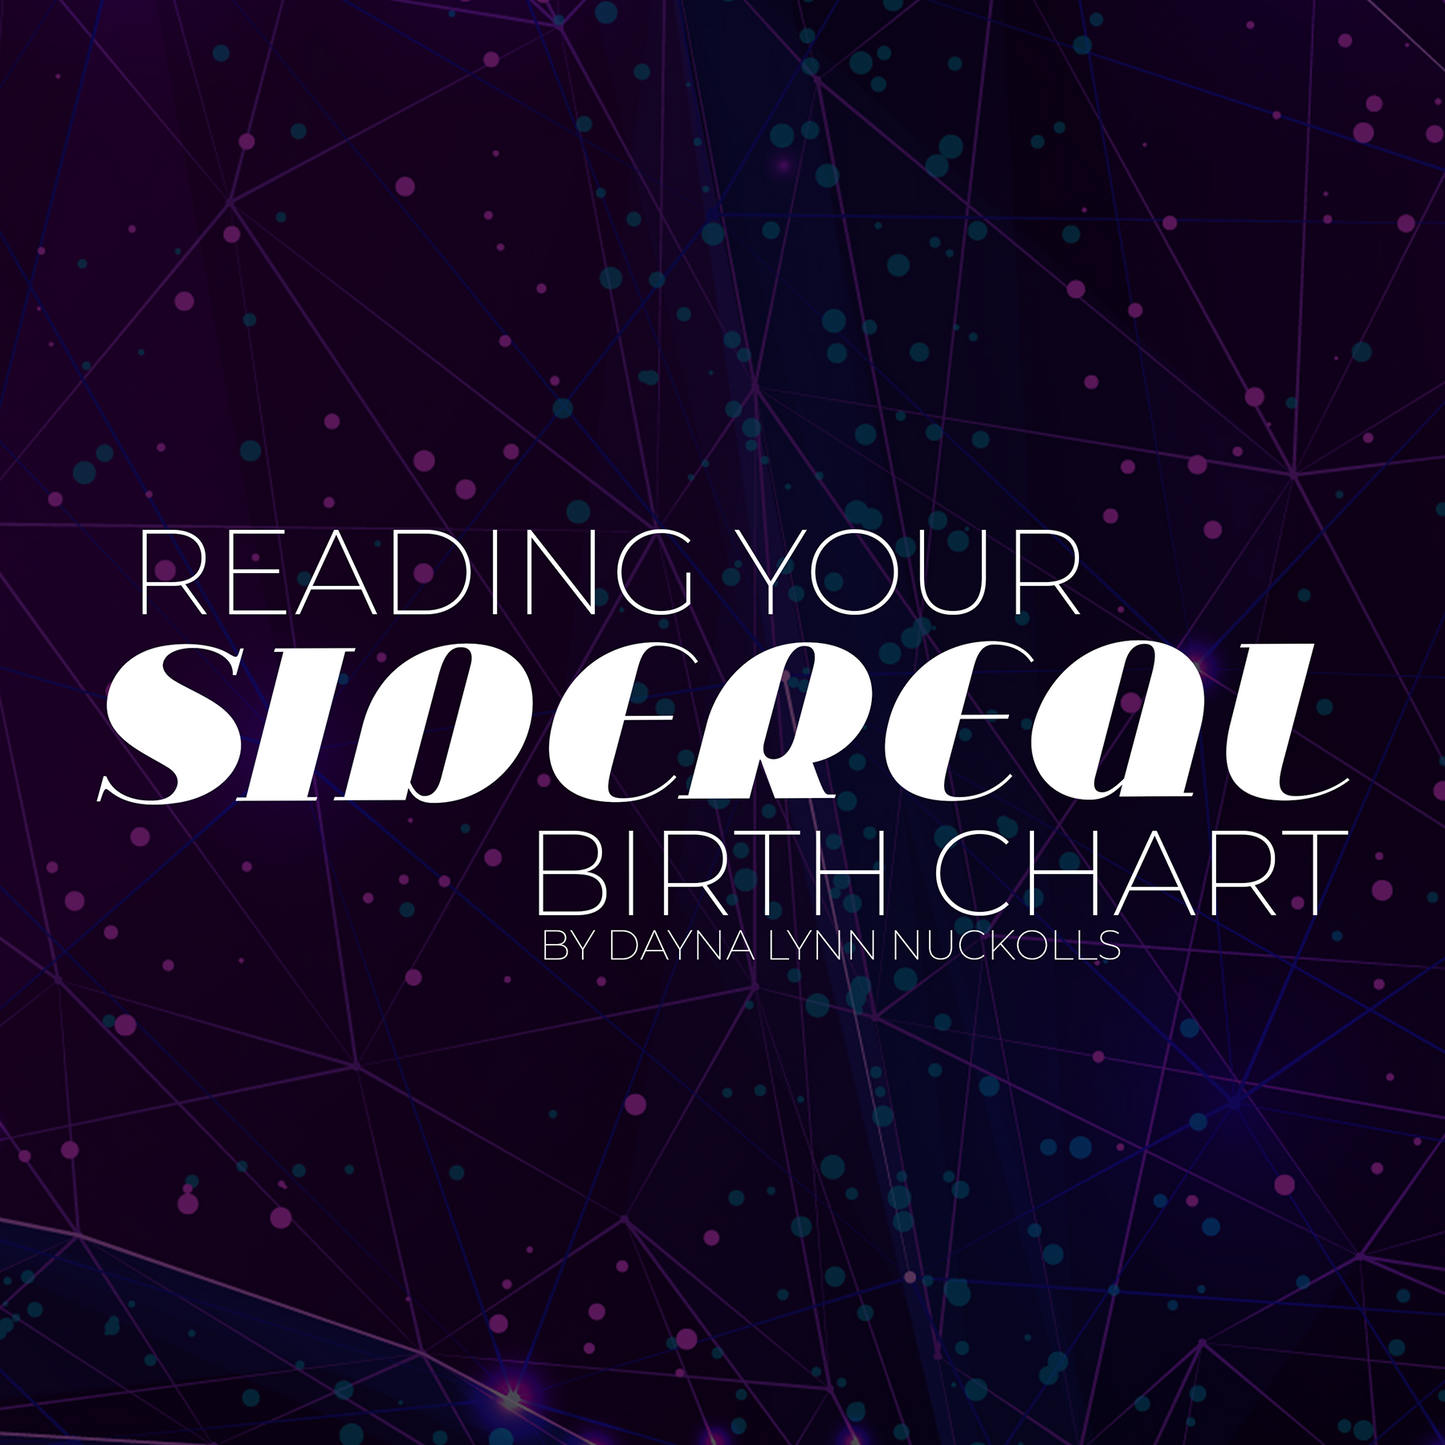 Reading Your Sidereal Birth Chart (Workshop Content)